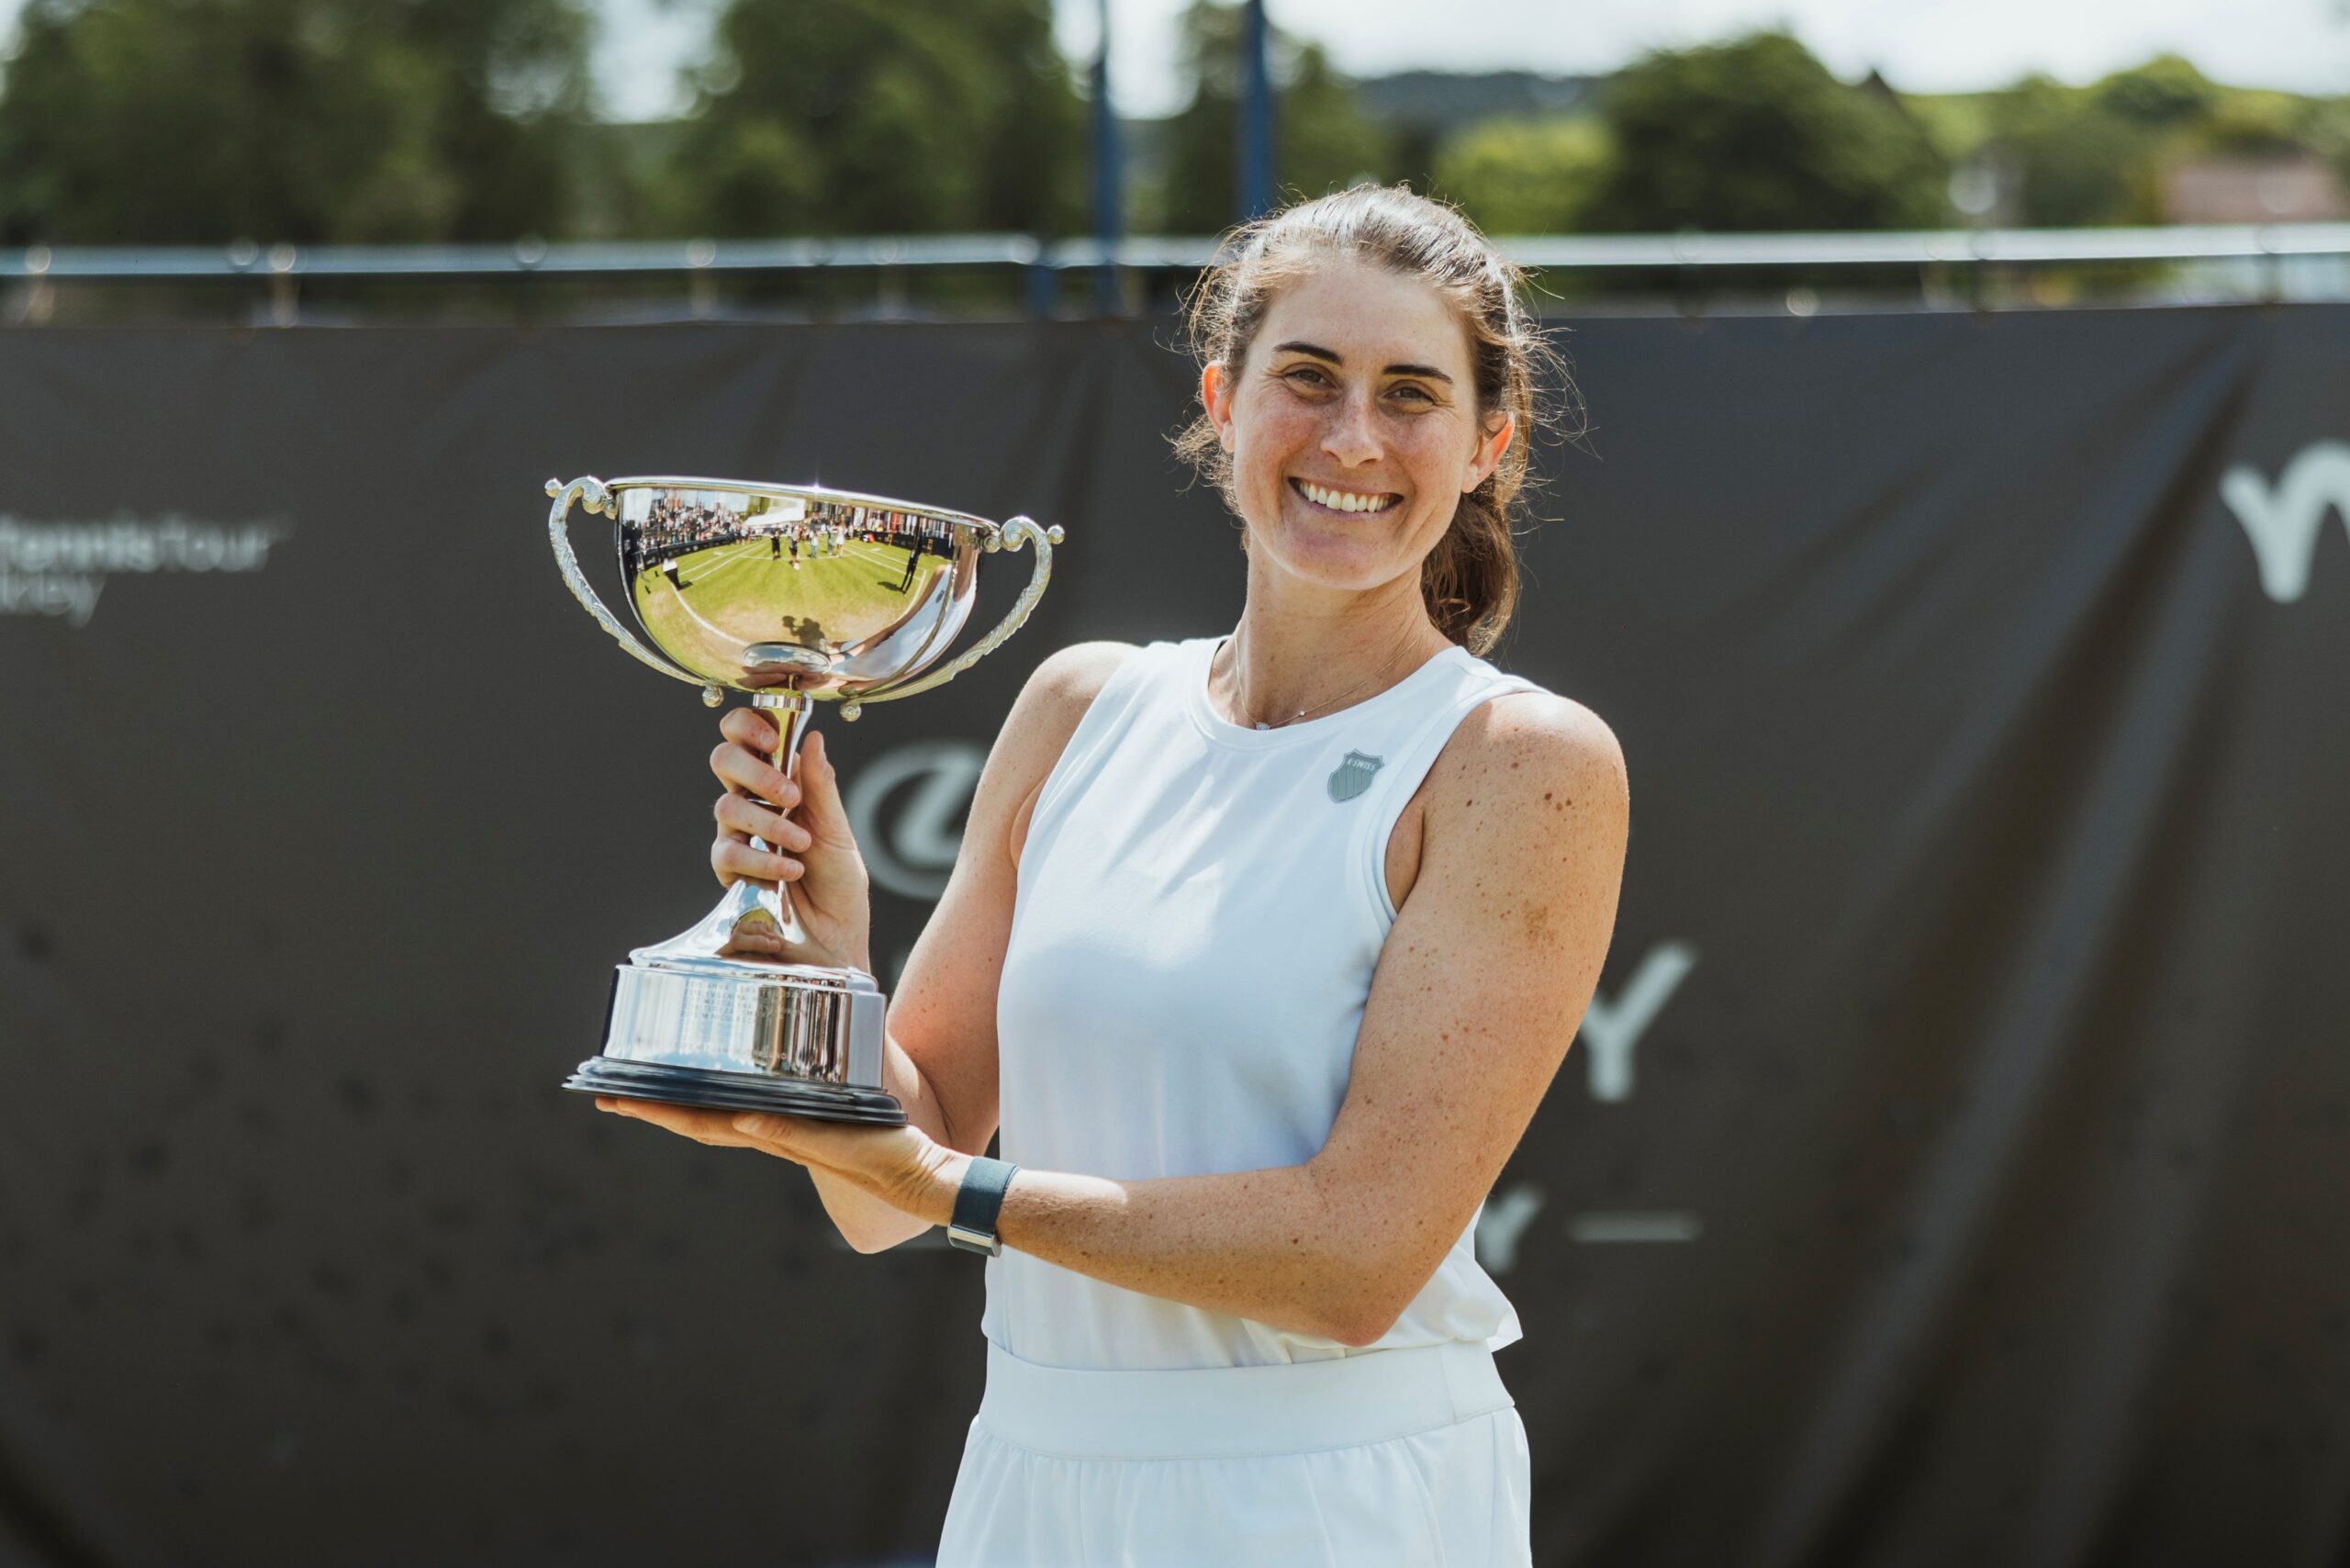 Rebecca Marino holds up the Ilkley trophy, her first title on grass. She is playing qualifying at Wimbledon this week.